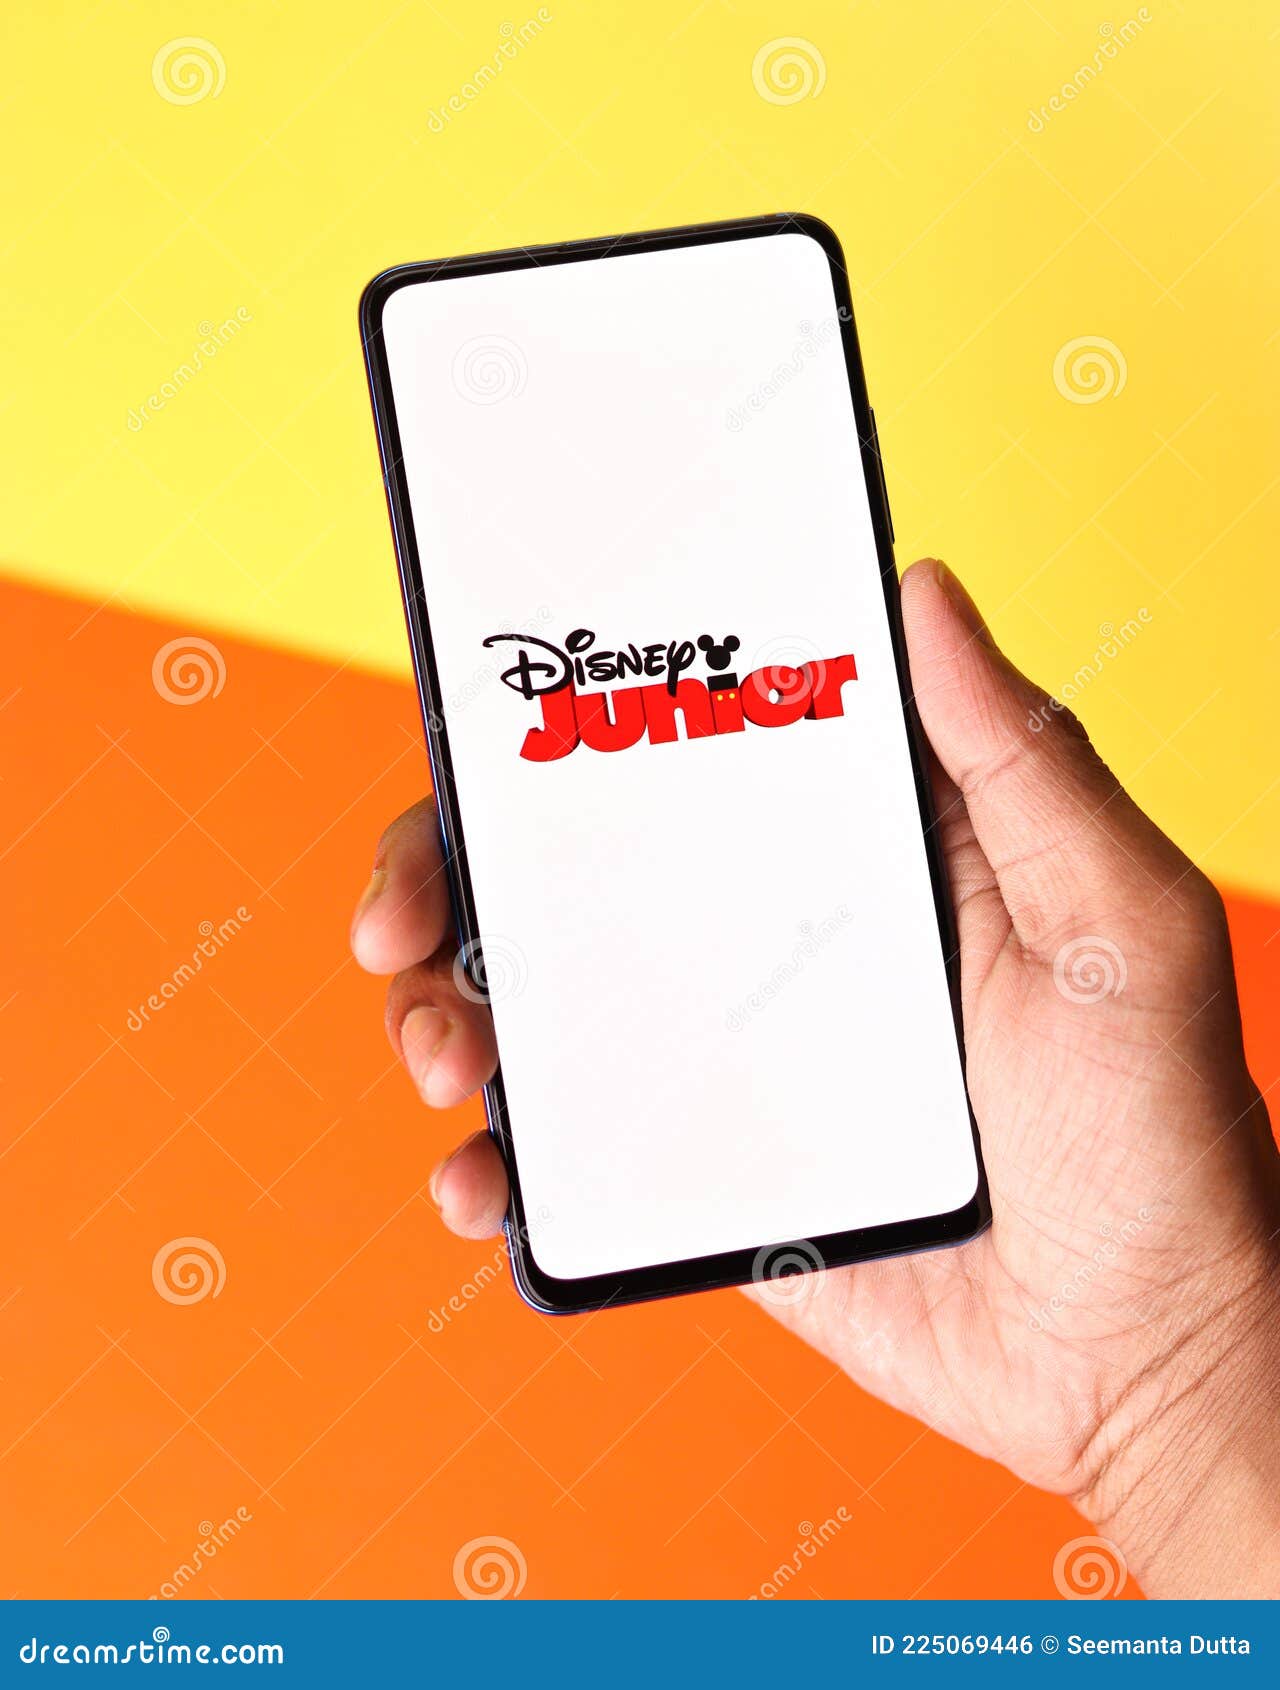 Assam India June 21 21 Disney Junior Logo On Phone Screen Stock Image Editorial Photo Image Of Channel Networks